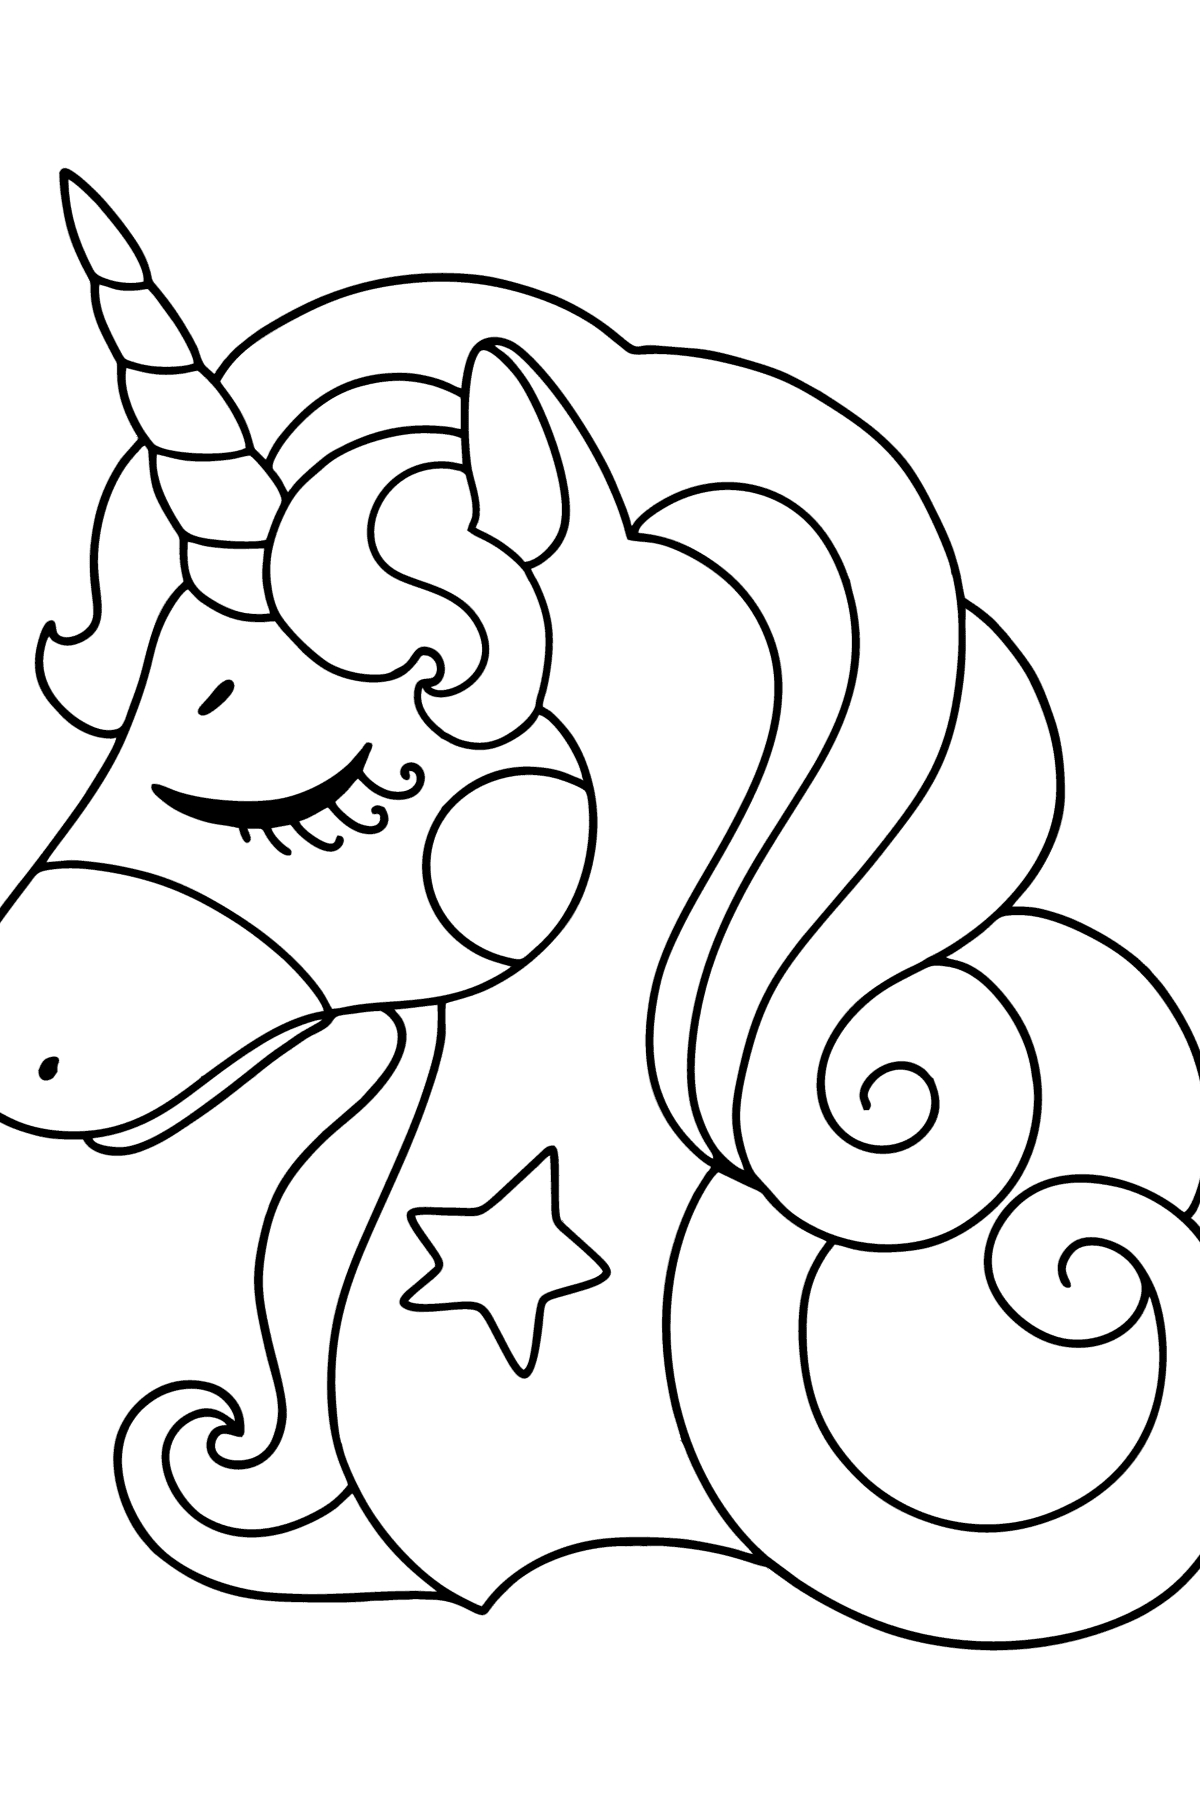 Unicorn head coloring page - Coloring Pages for Kids